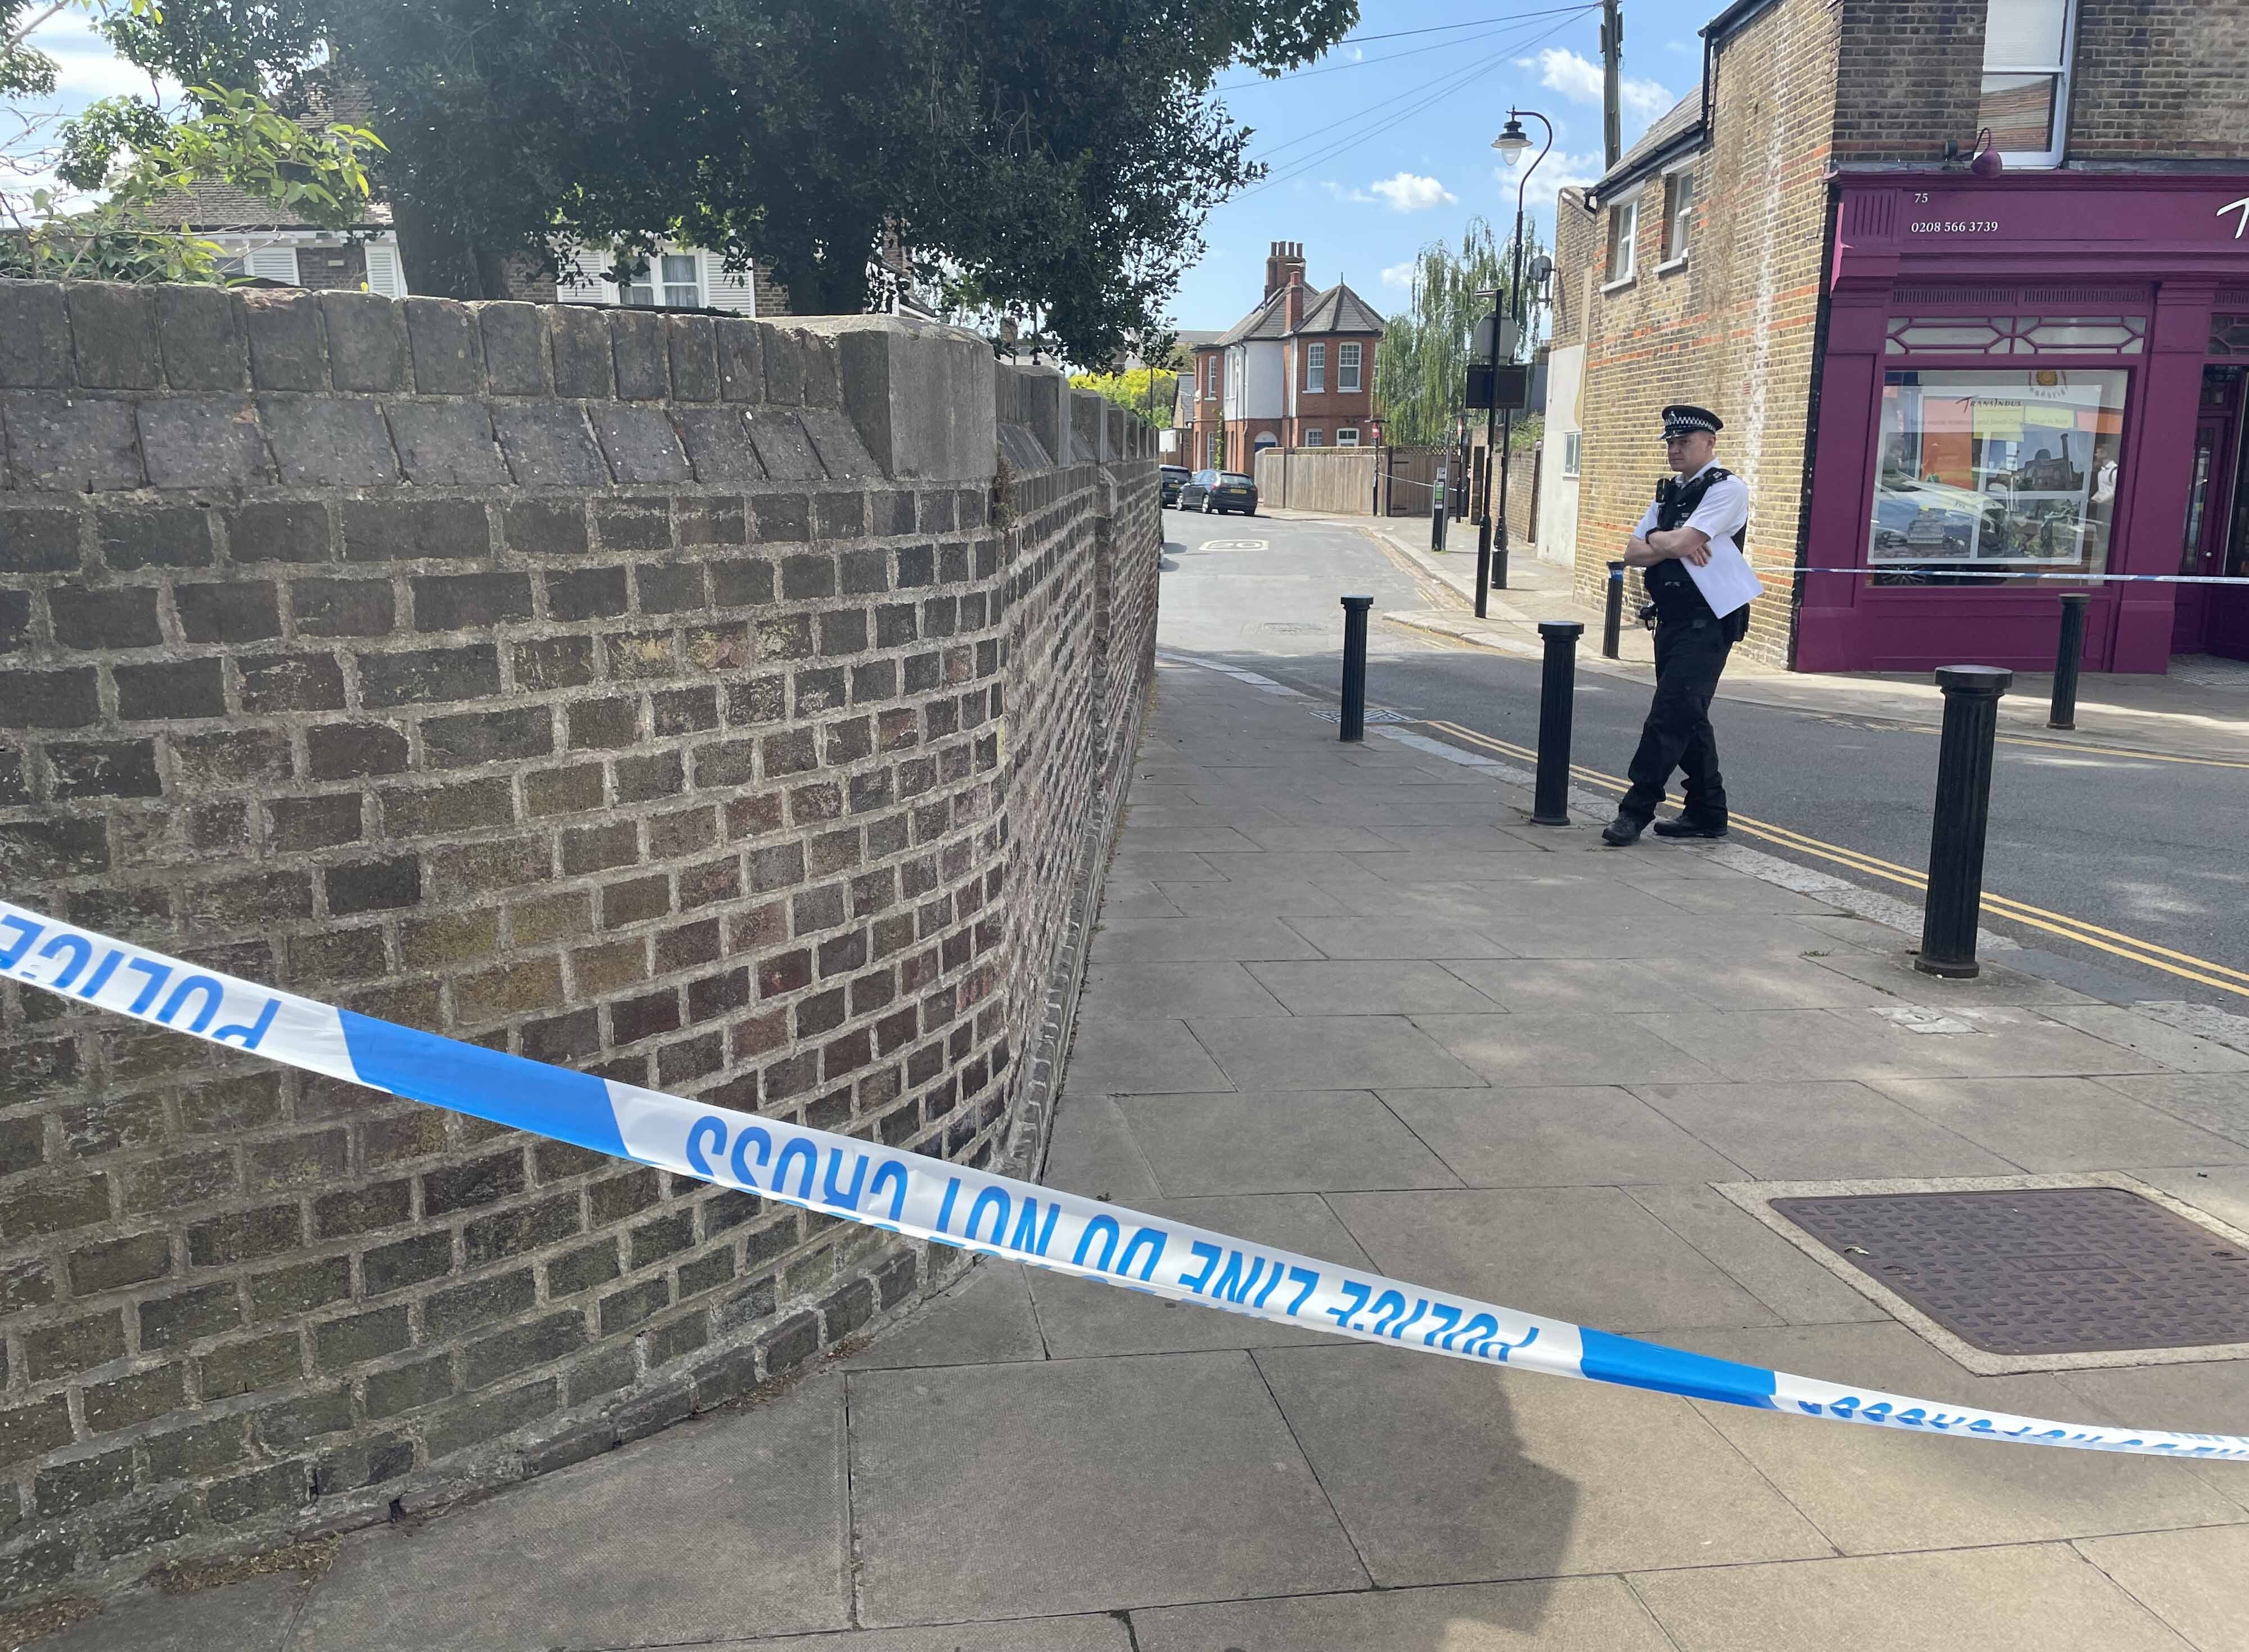 Police at the scene in Ealing, west London (Ted Hennessey/PA)